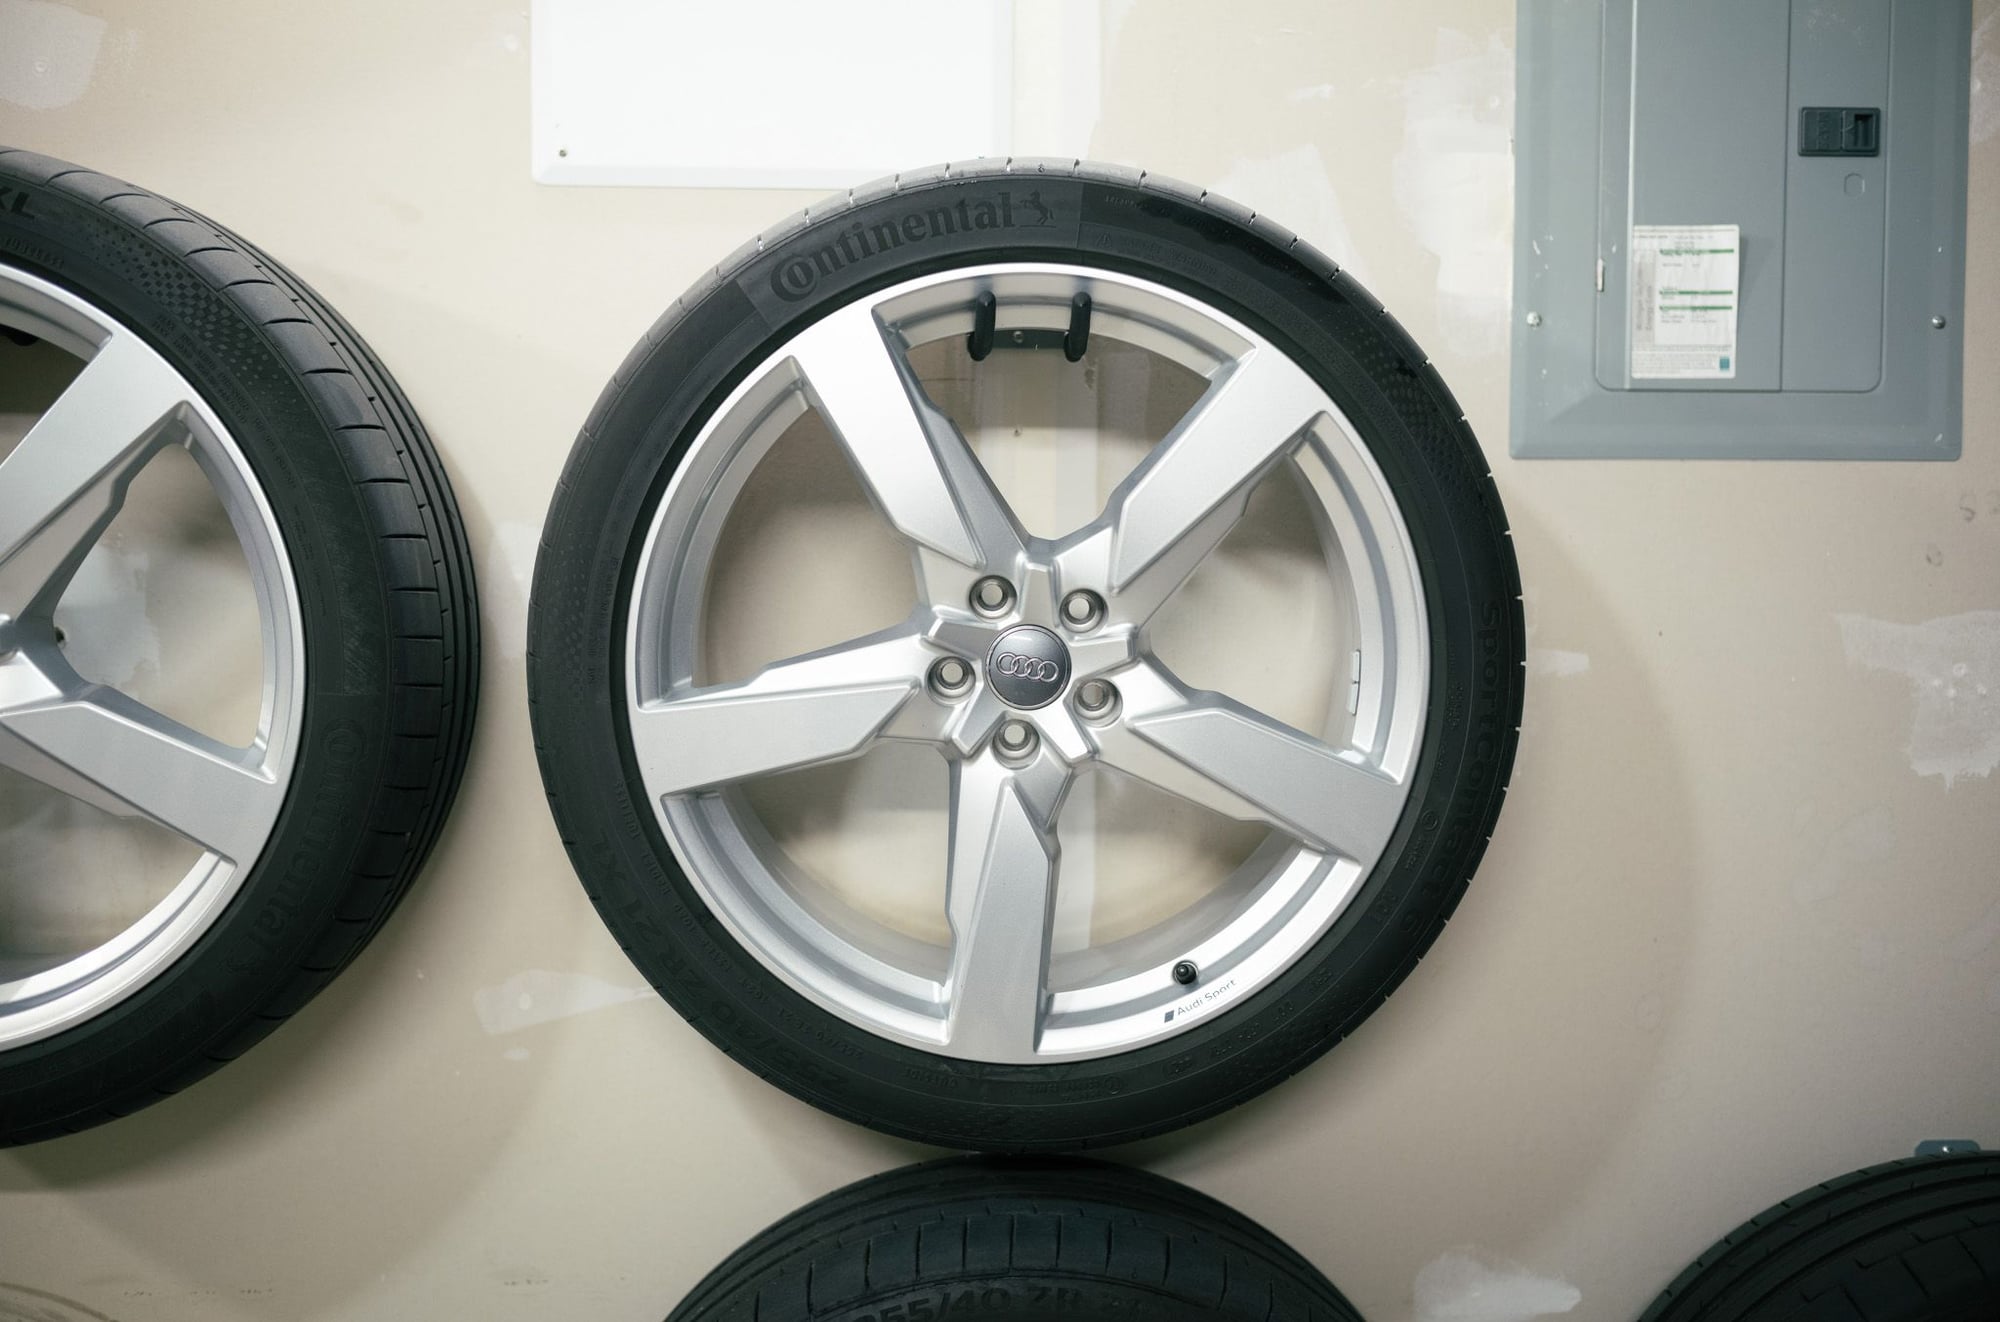 Wheels and Tires/Axles - FS: 21" SQ5 5-arm-polygon design wheels, with summer tires - Used - 2018 to 2024 Audi SQ5 - 2018 to 2024 Audi Q5 - Ann Arbor, MI 48197, United States